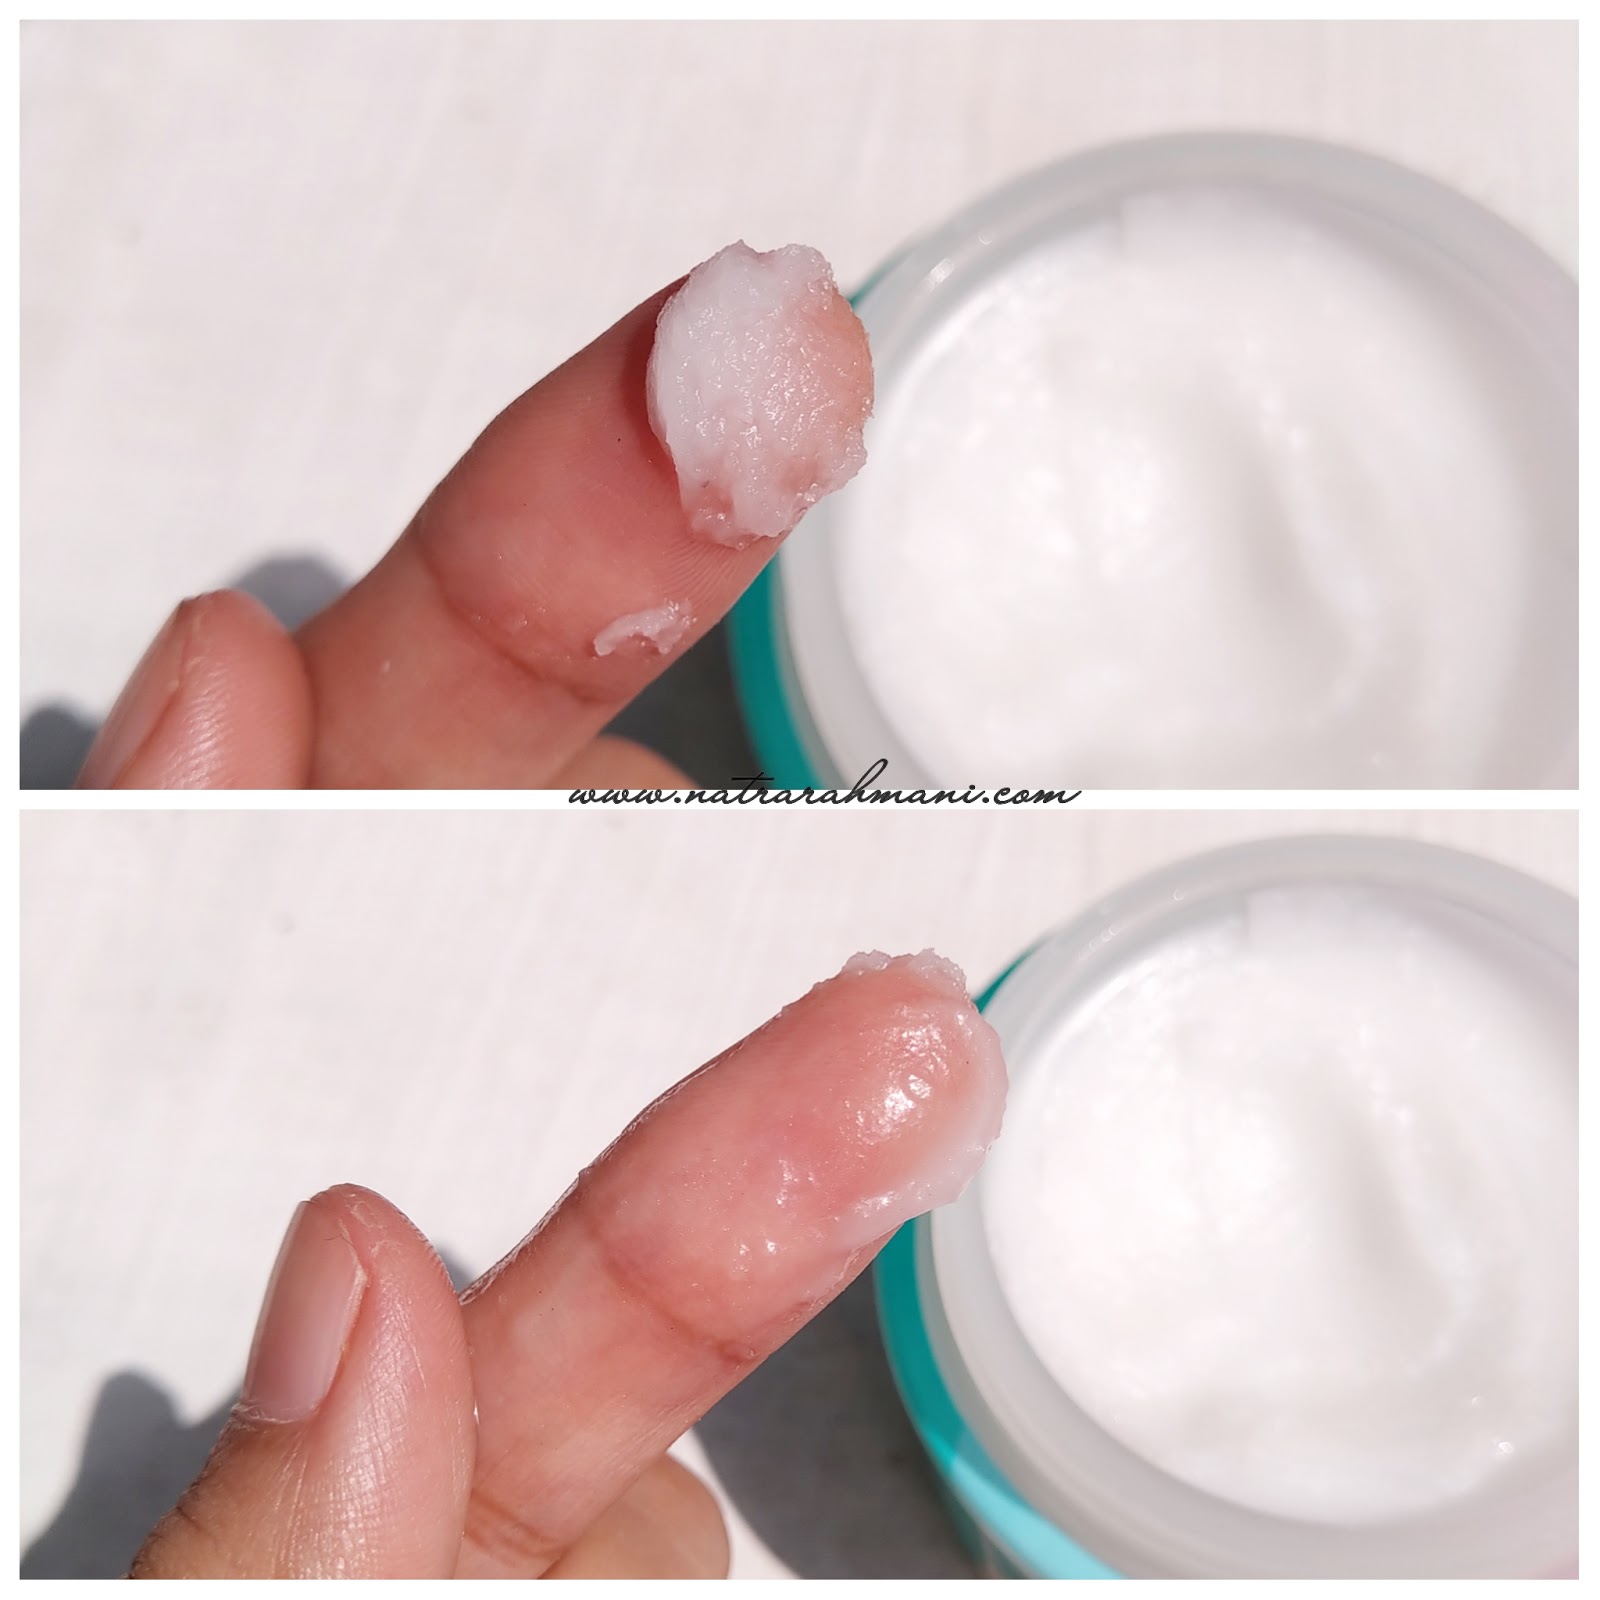 review-ponds-cleansing-balm-indonesia-natrarahmani